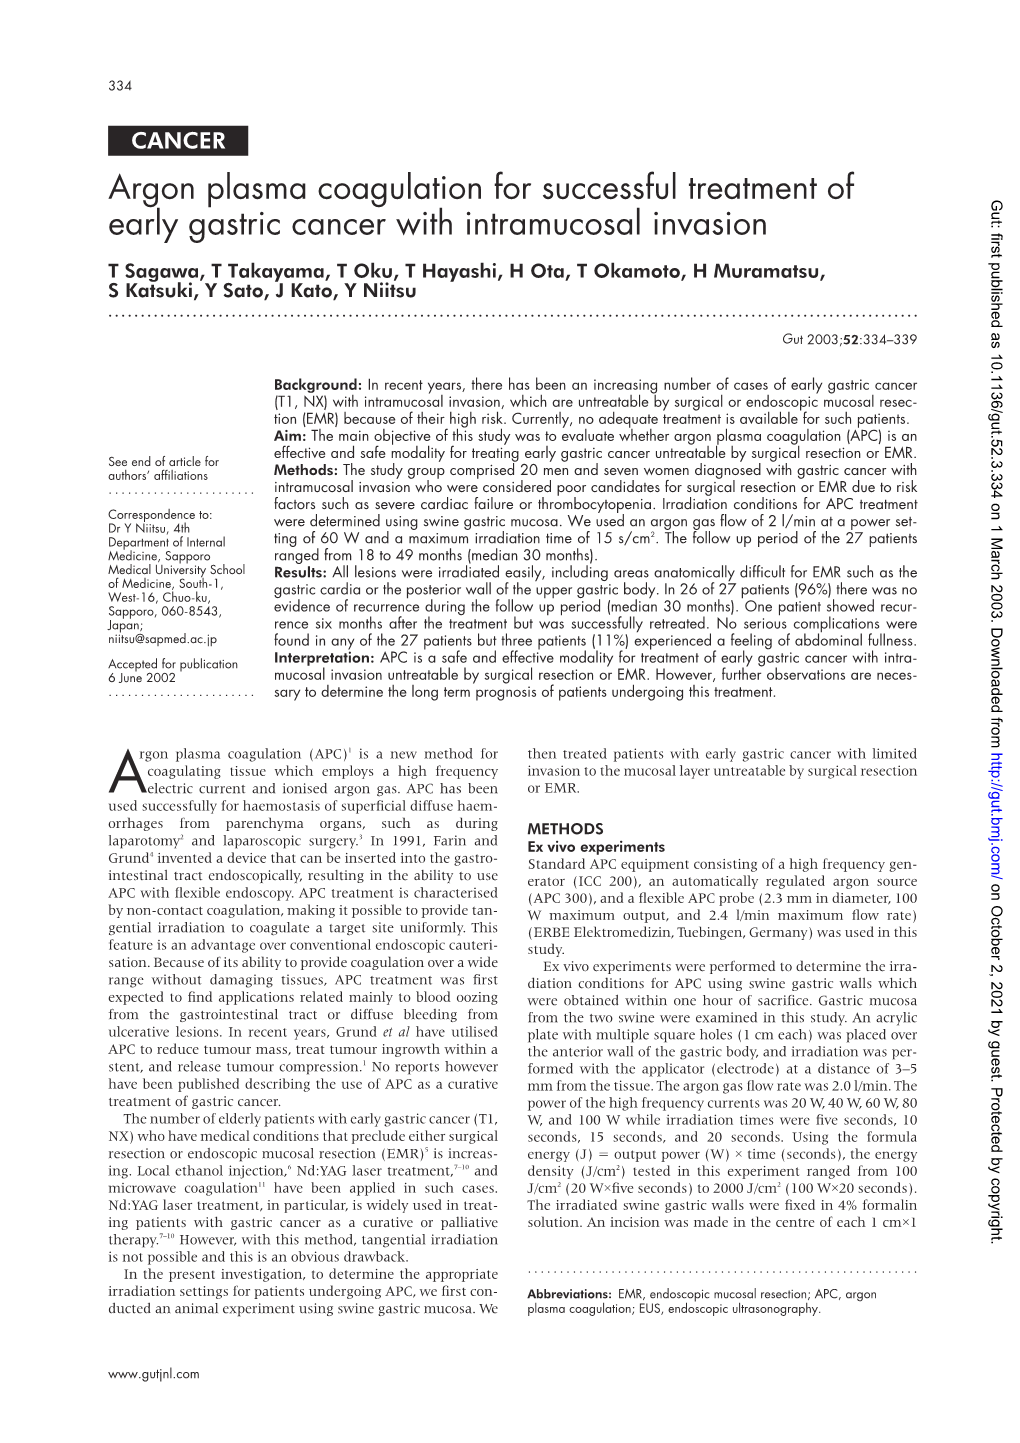 Argon Plasma Coagulation for Successful Treatment of Early Gastric